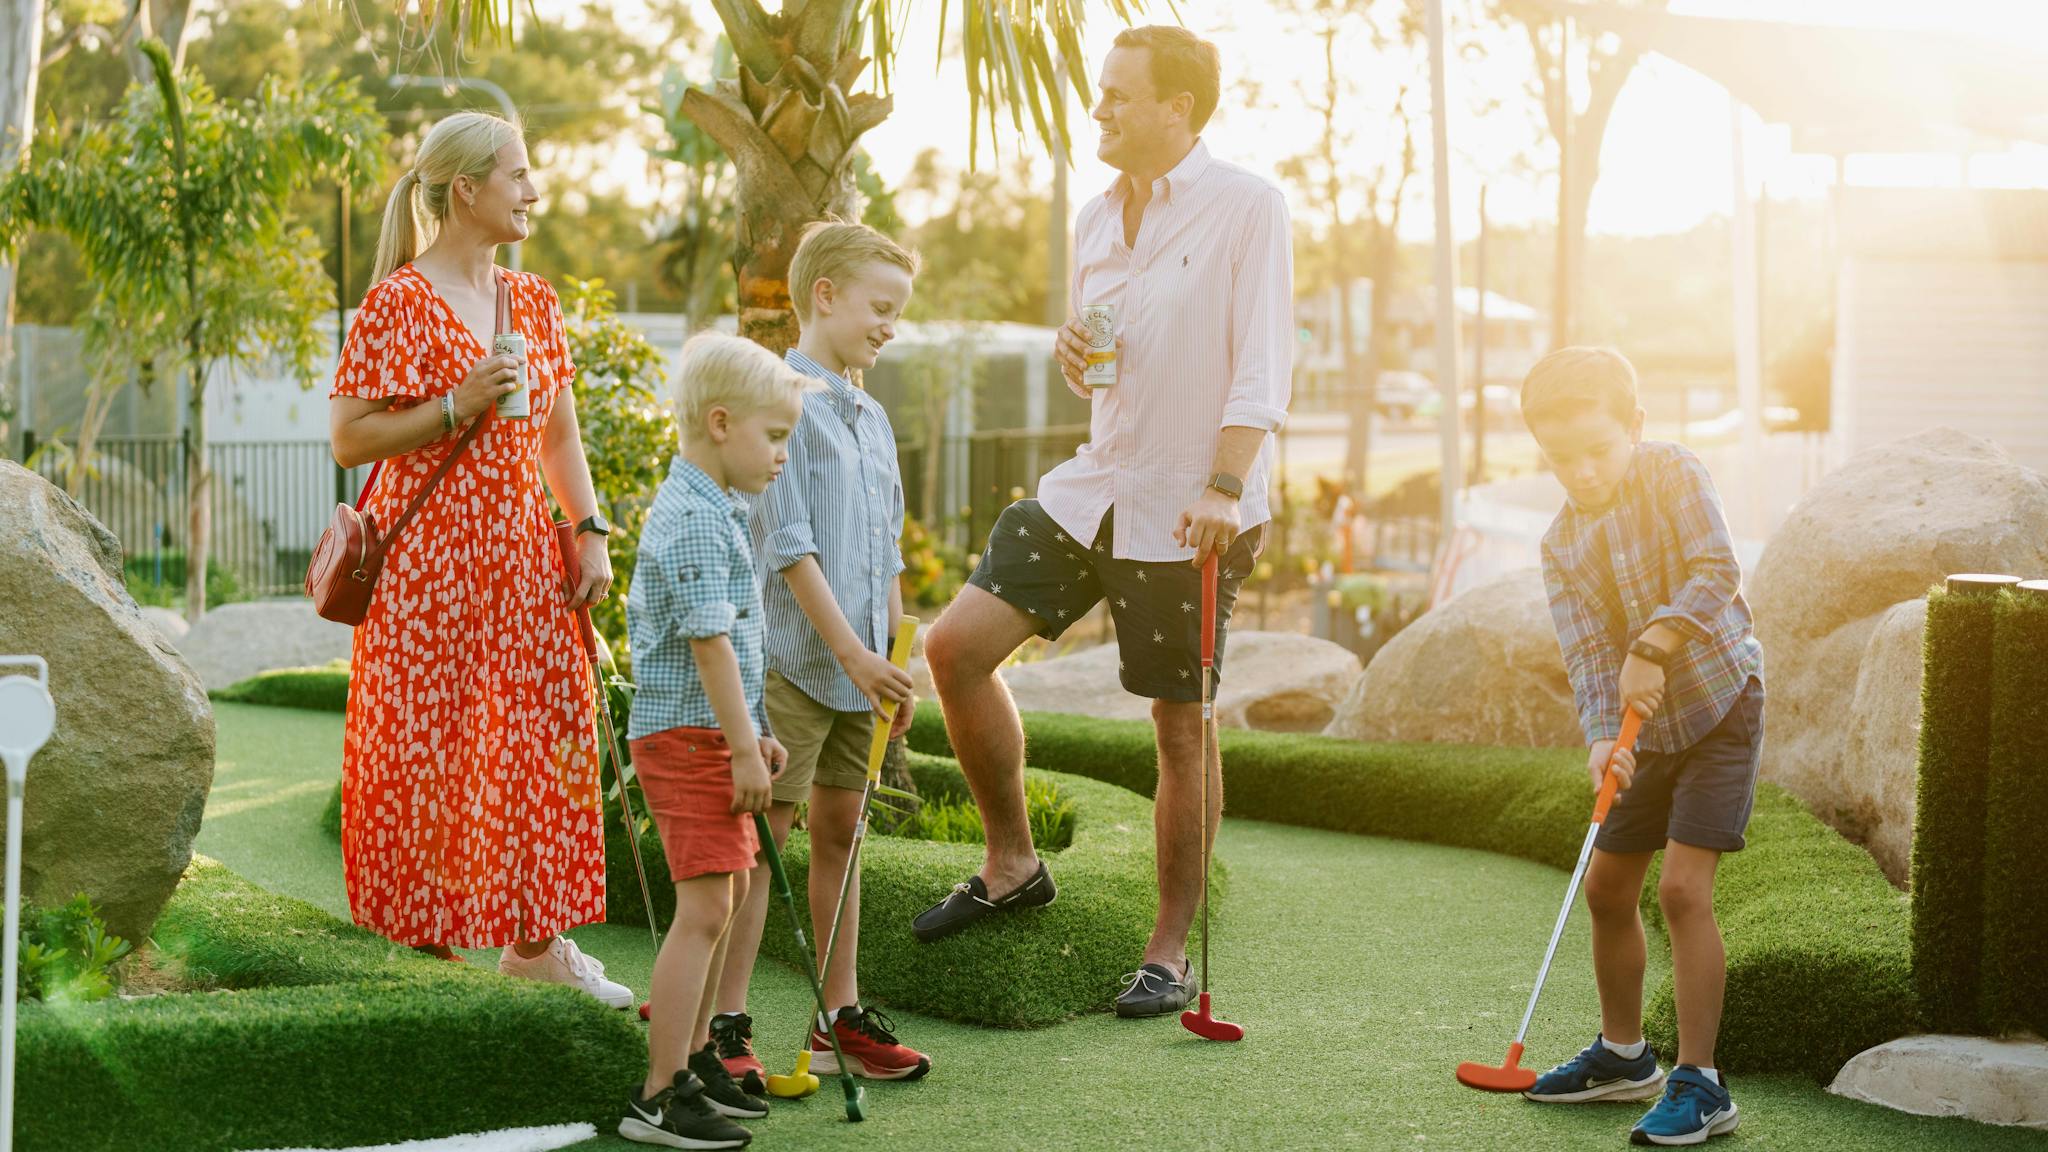 Fun for the whole family! Alex Hills Putt Putt